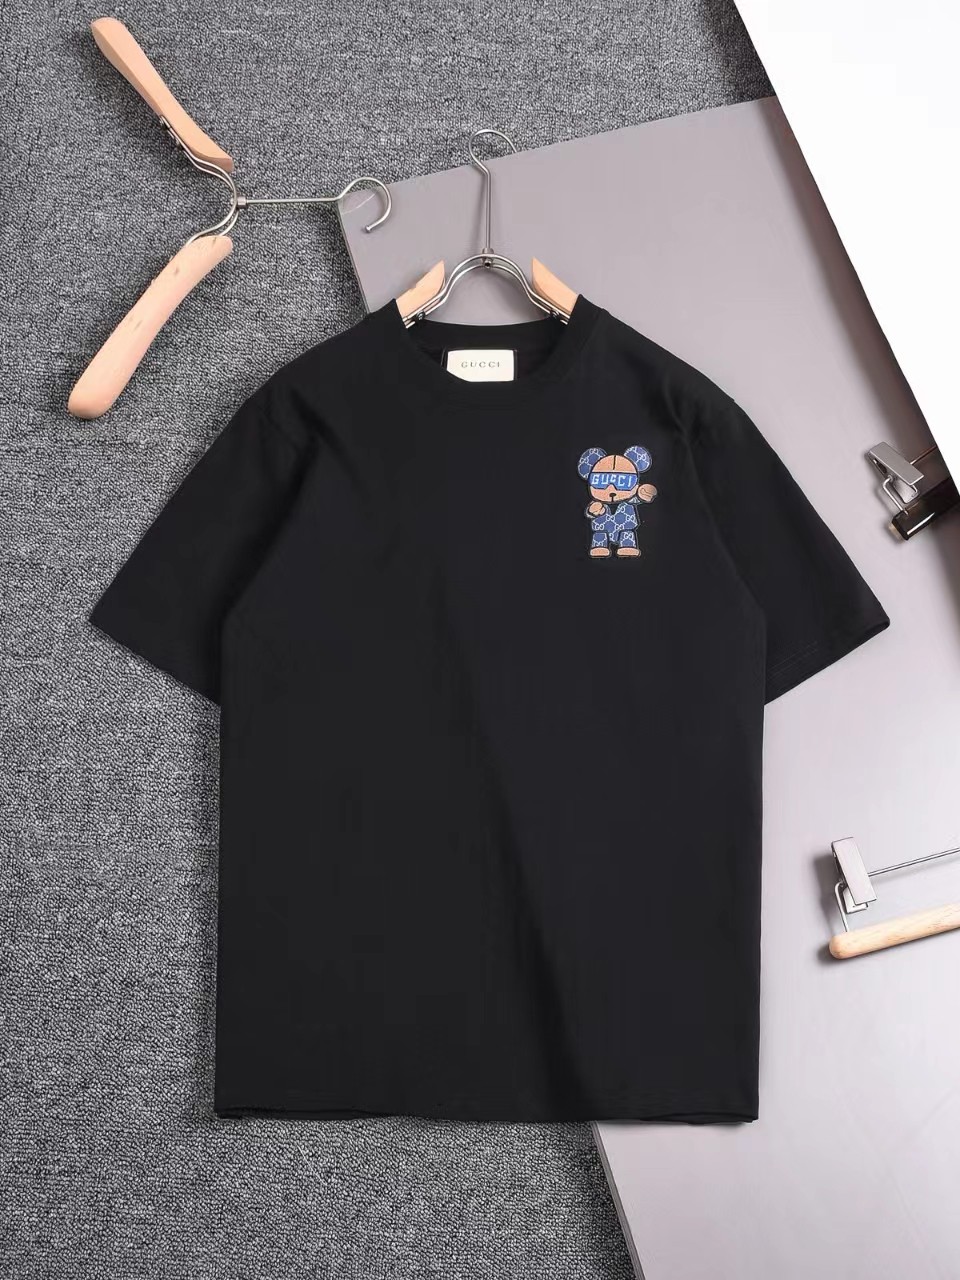 Gucci Clothing T-Shirt Designer 1:1 Replica
 Apricot Color Beige Black Blue Khaki White Embroidery Unisex Combed Cotton Spring/Summer Collection